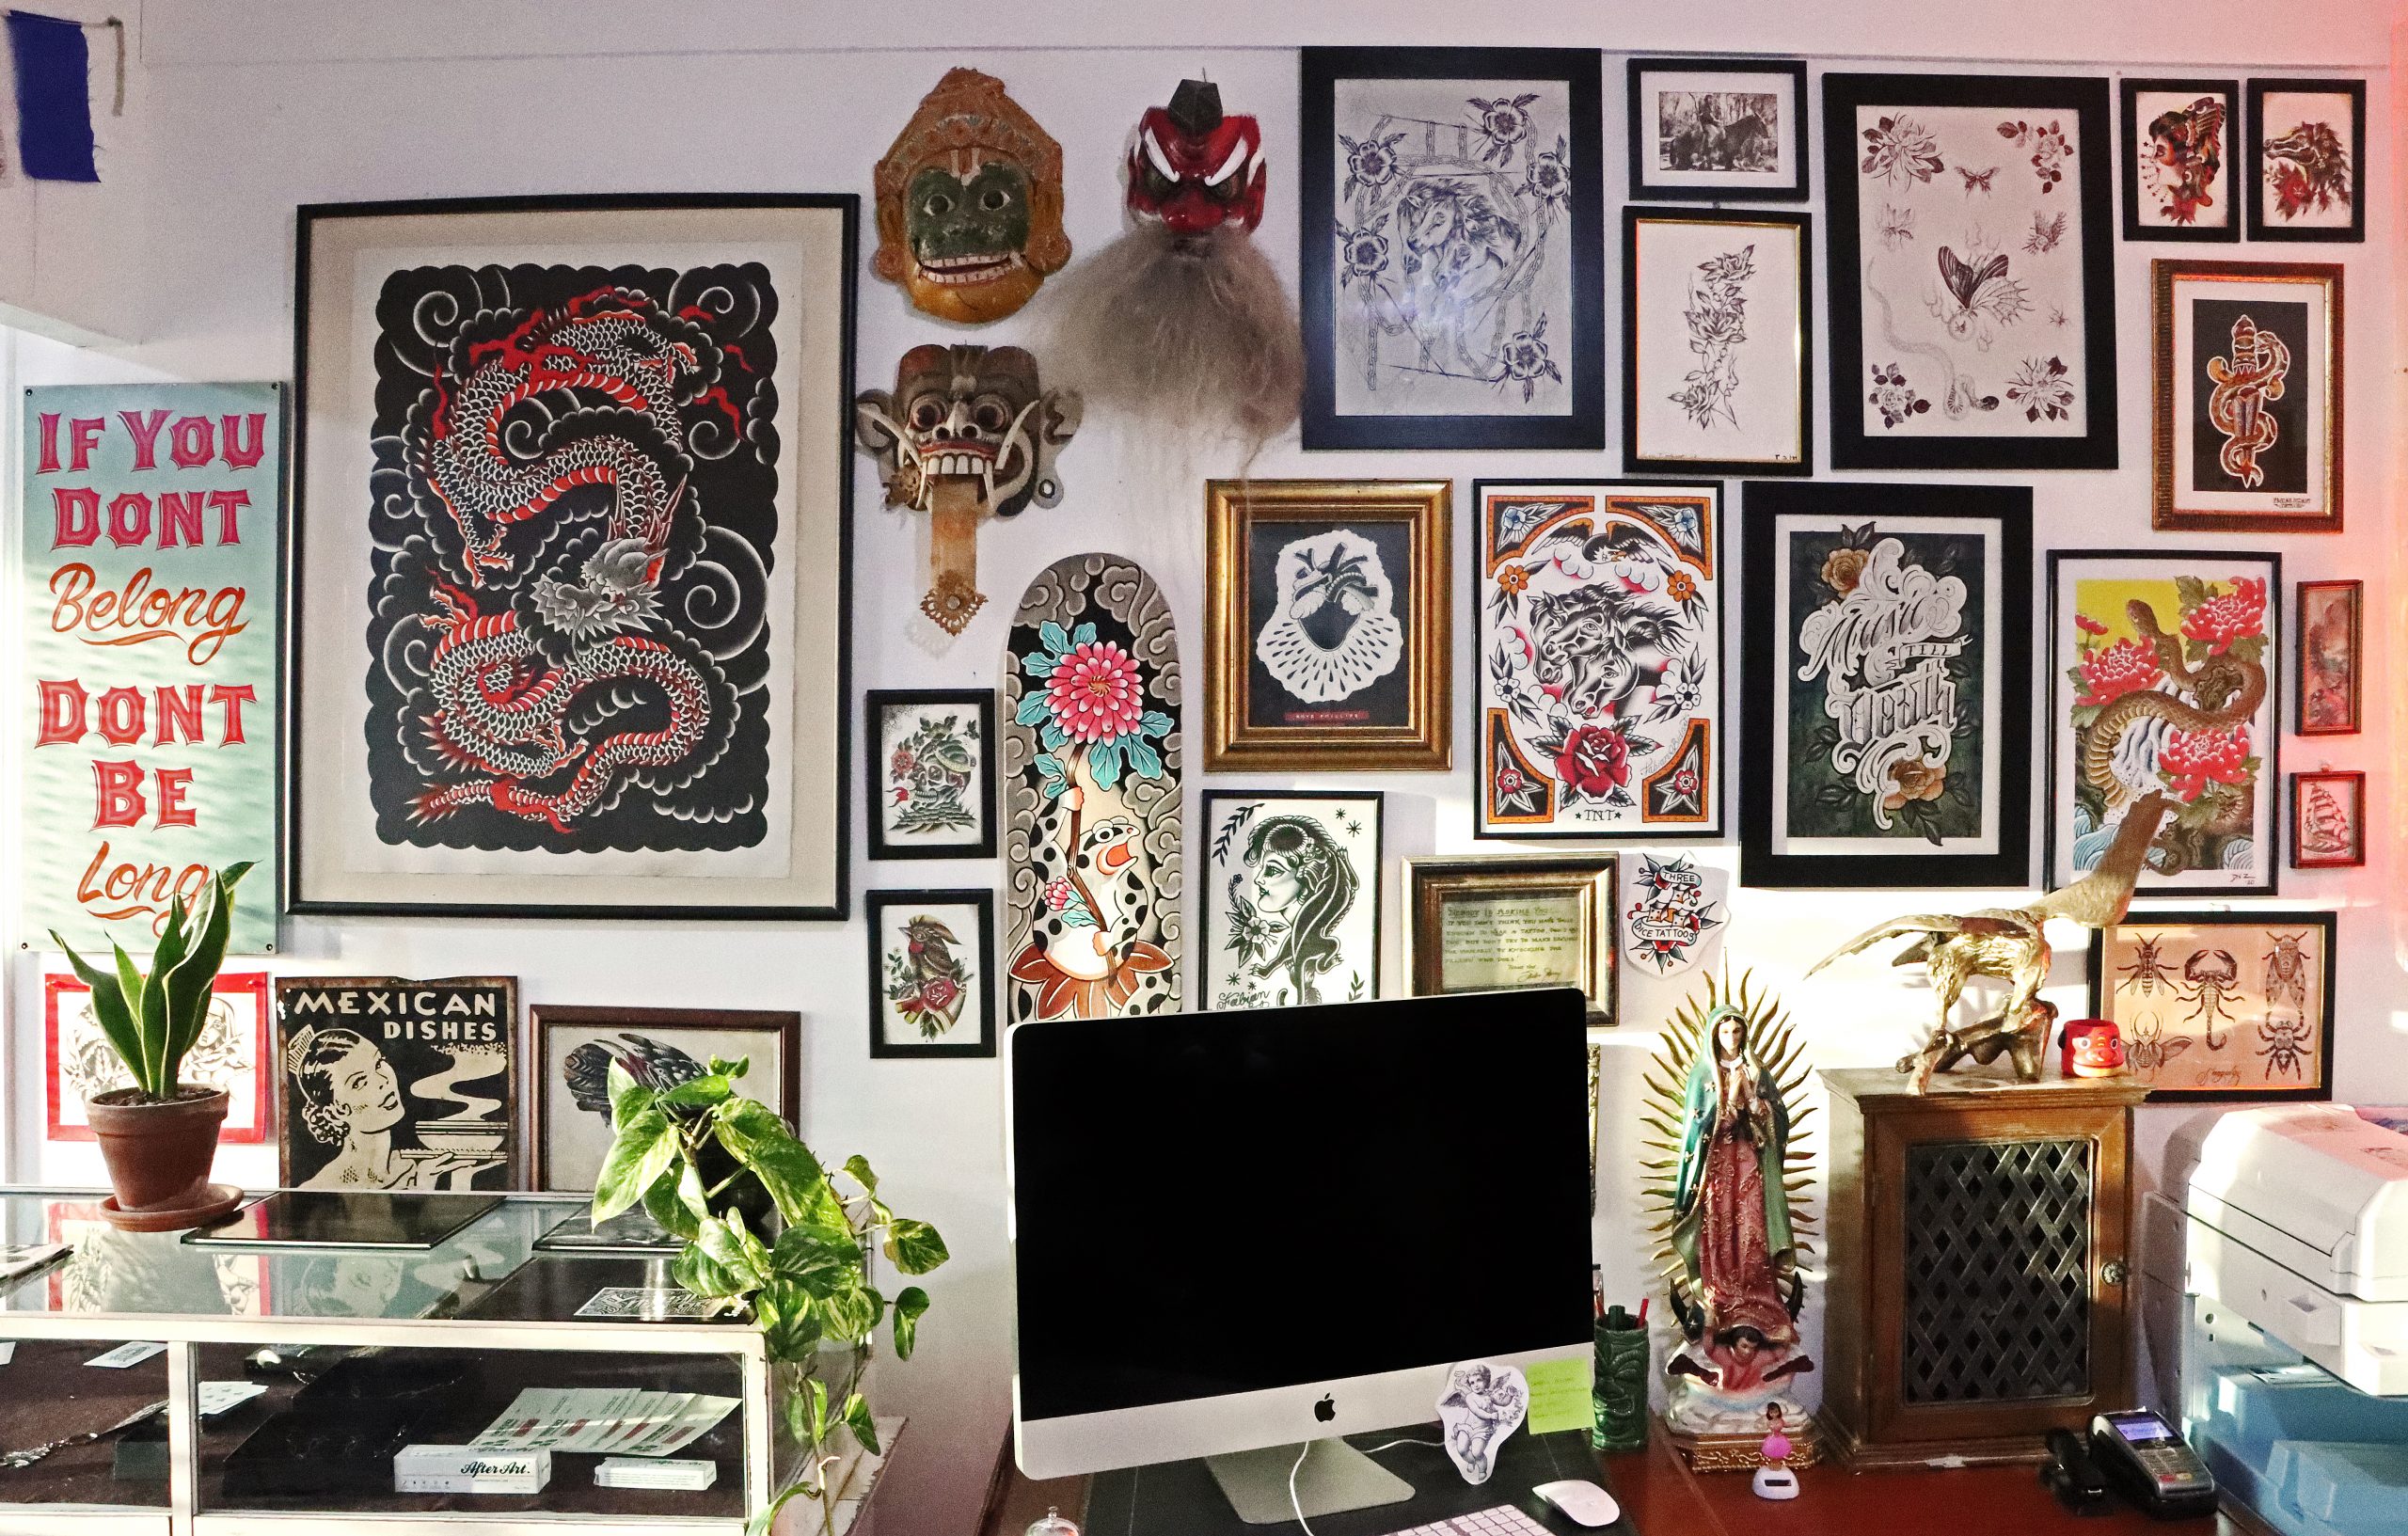 A view of the front desk at Three Dice Tattoo, a tattoo studio based in Auckland, New Zealand, showcasing classic, modern, Japanese and custom designs.